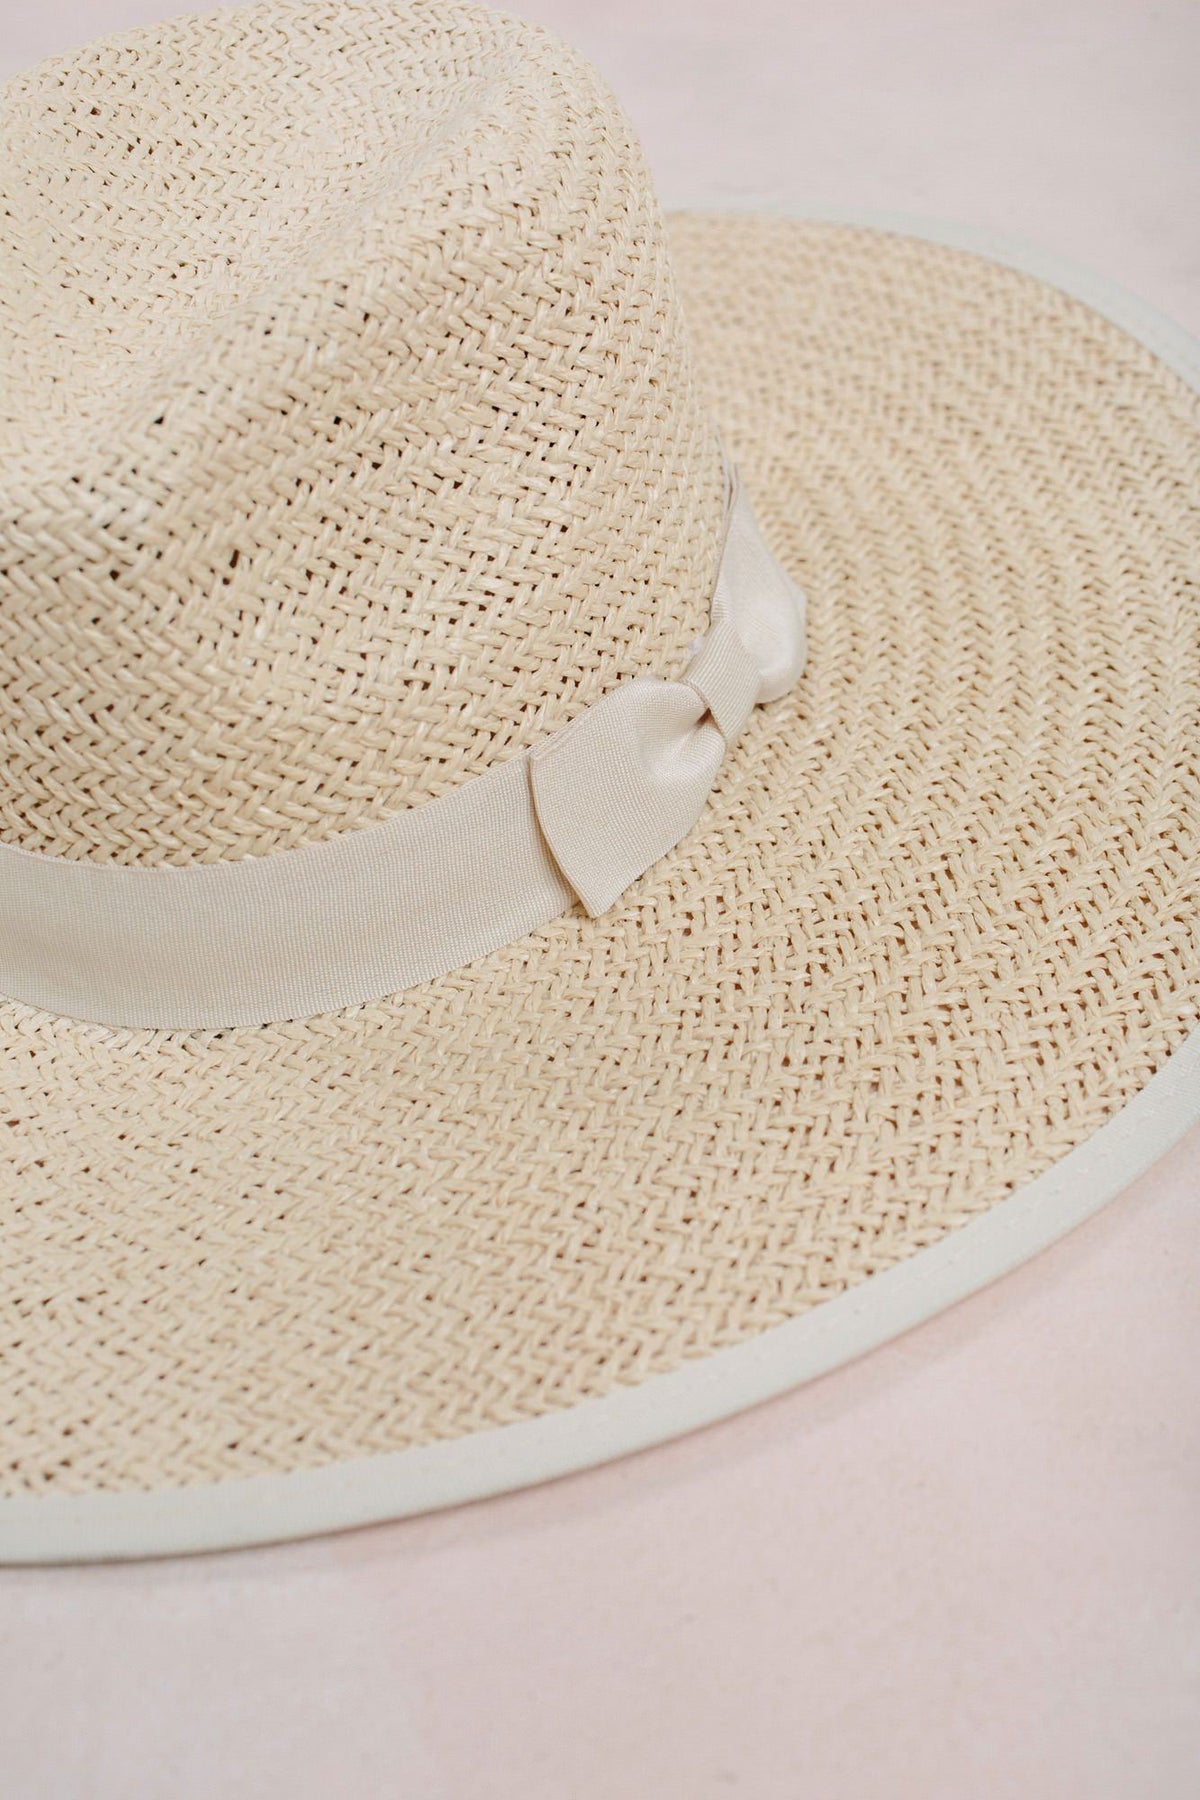 Wide Brim Straw Hat with Bow - Chrissy - Morning Lavender Online Boutique